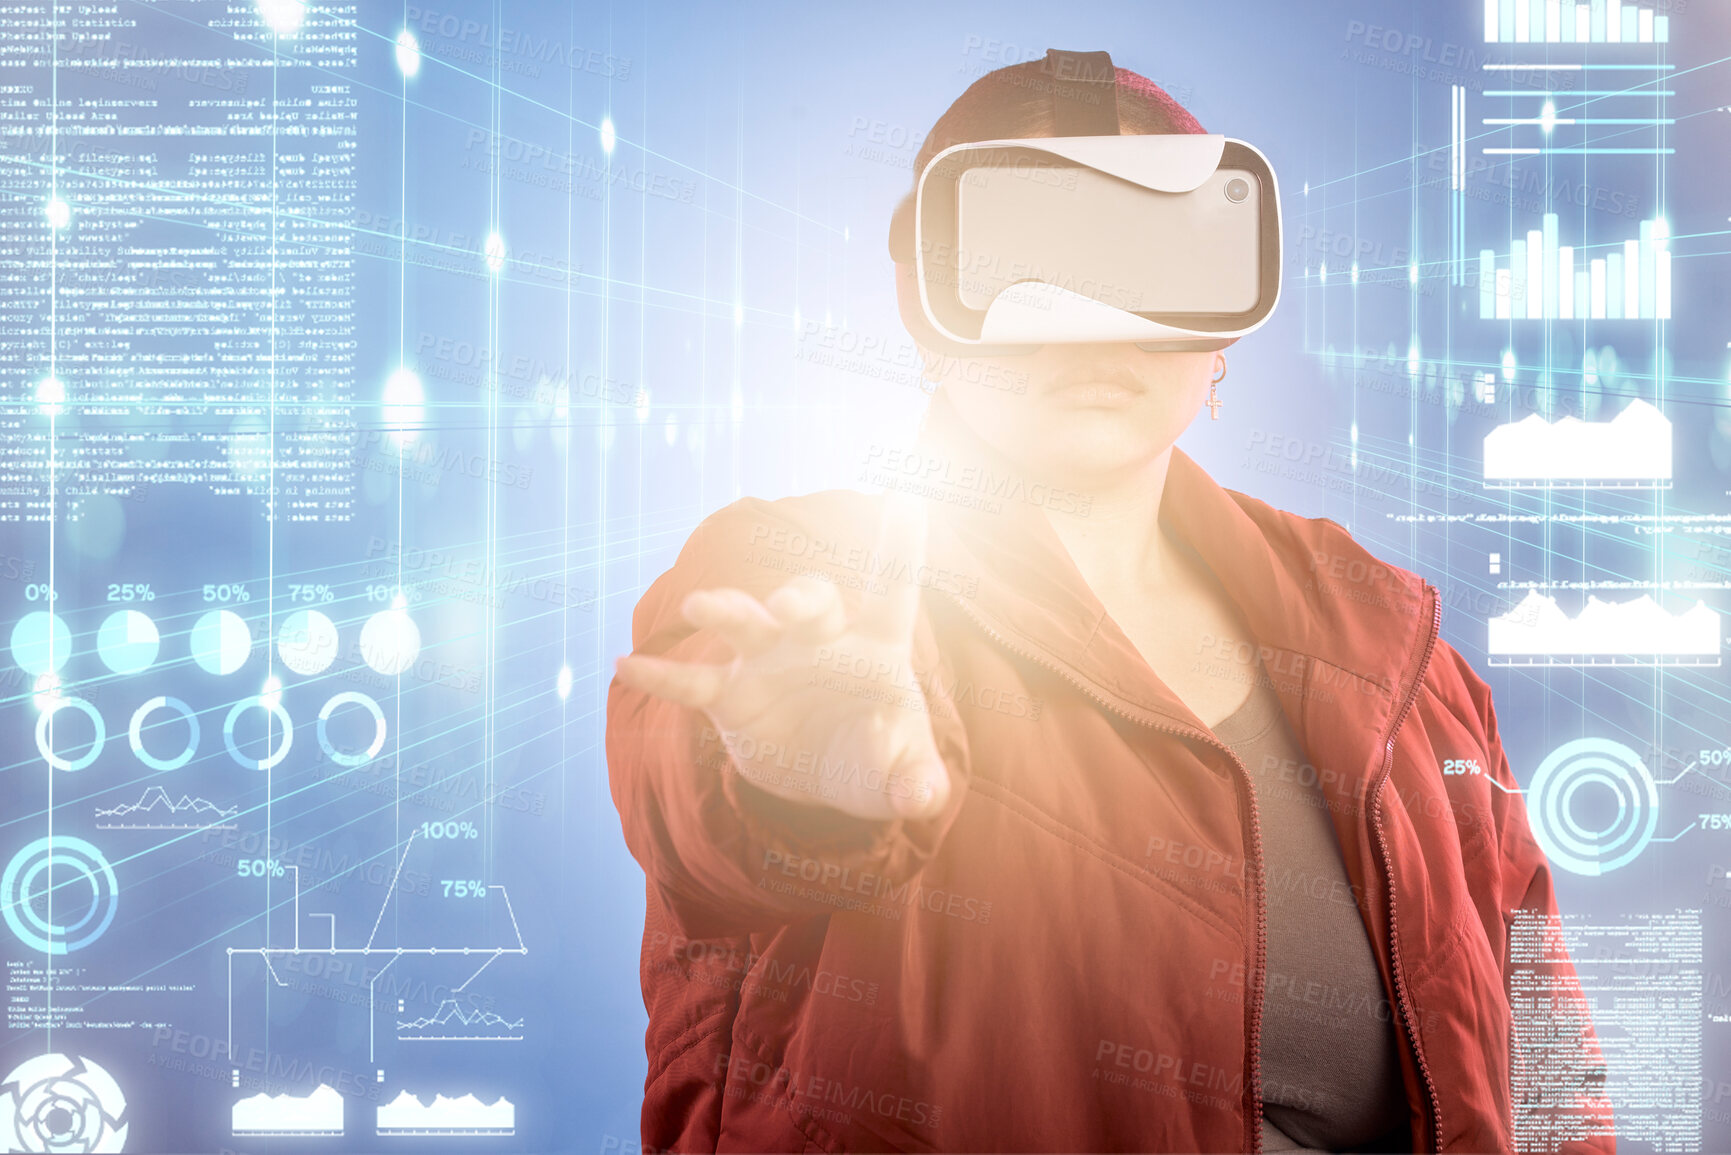 Buy stock photo Light, woman or virtual reality glasses with overlay for digital transformation, 3d charts or graphs online. Girl with vr headset in holographic cybersecurity technology for big data or future news